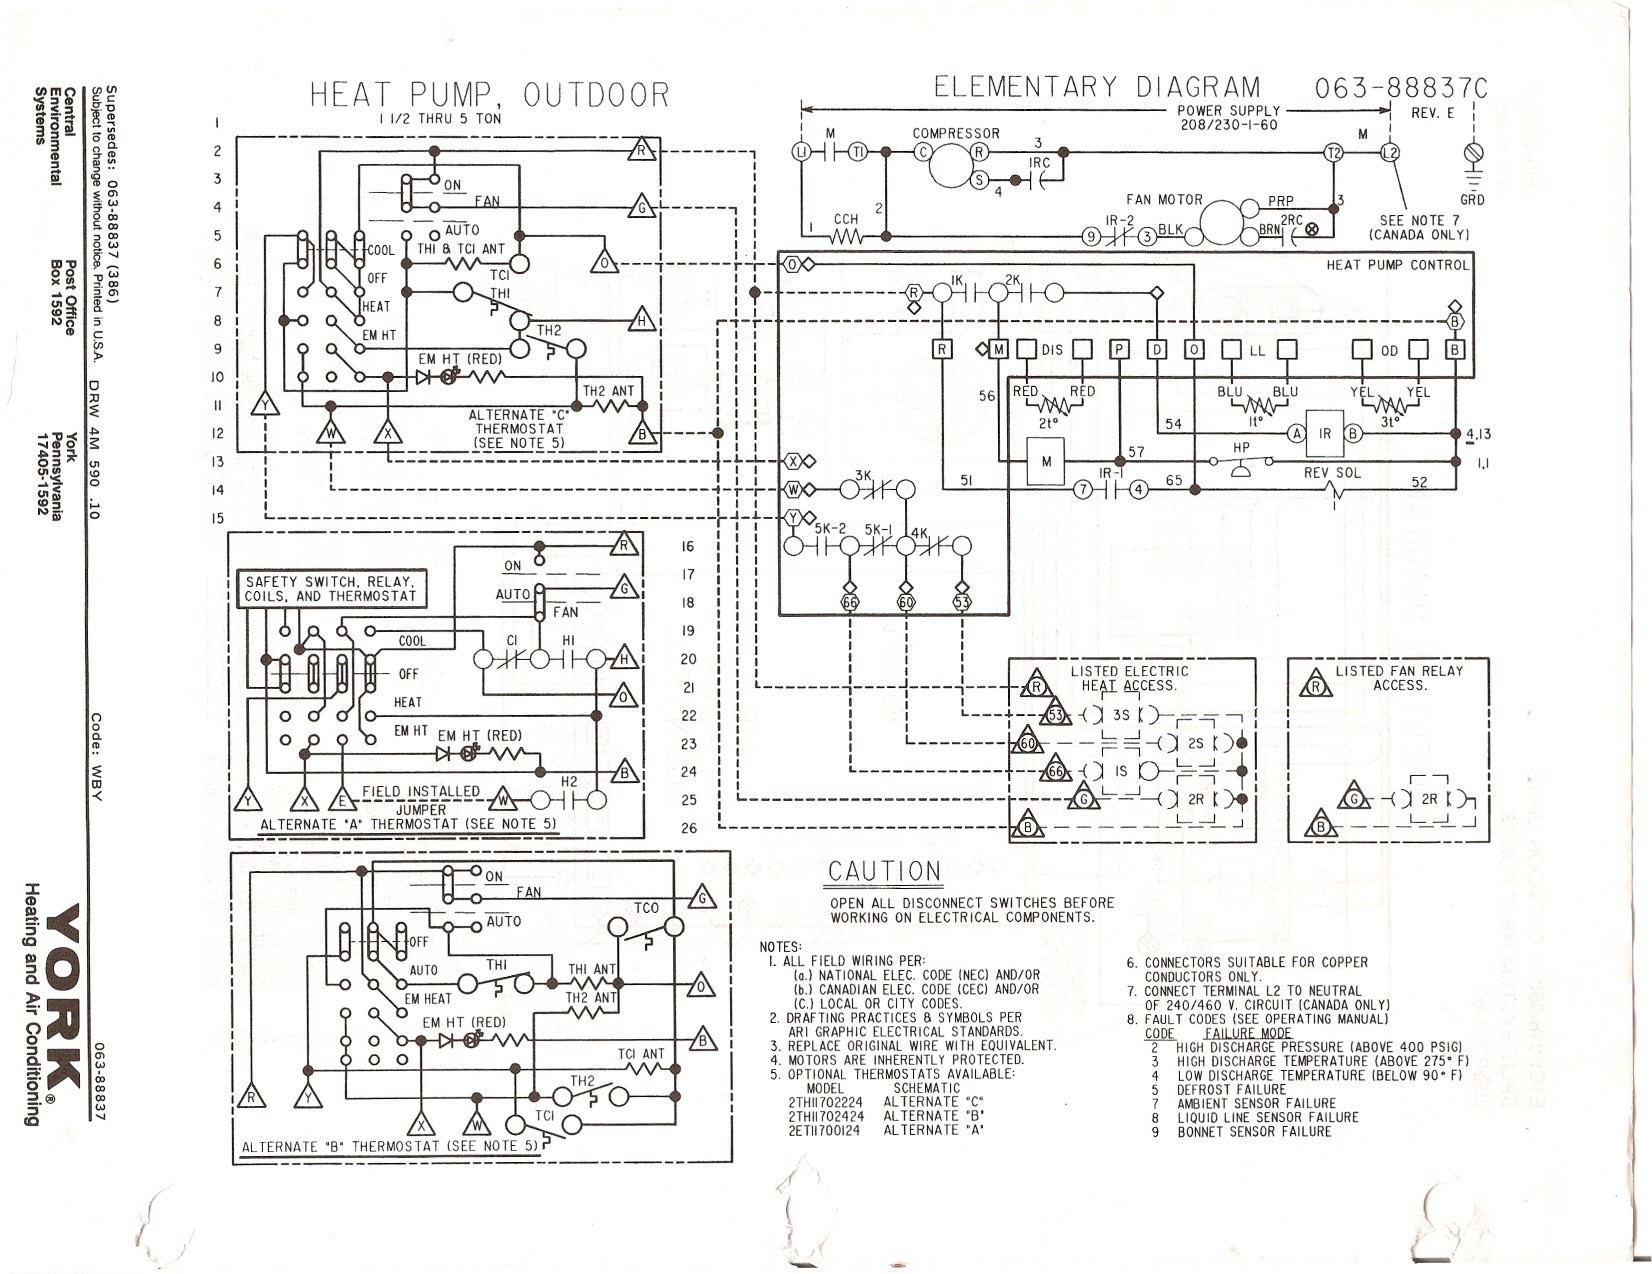 Wiring Diagram Zd30 Best Wiring Diagram for York Air Conditioner Best Mcquay Air Conditioner